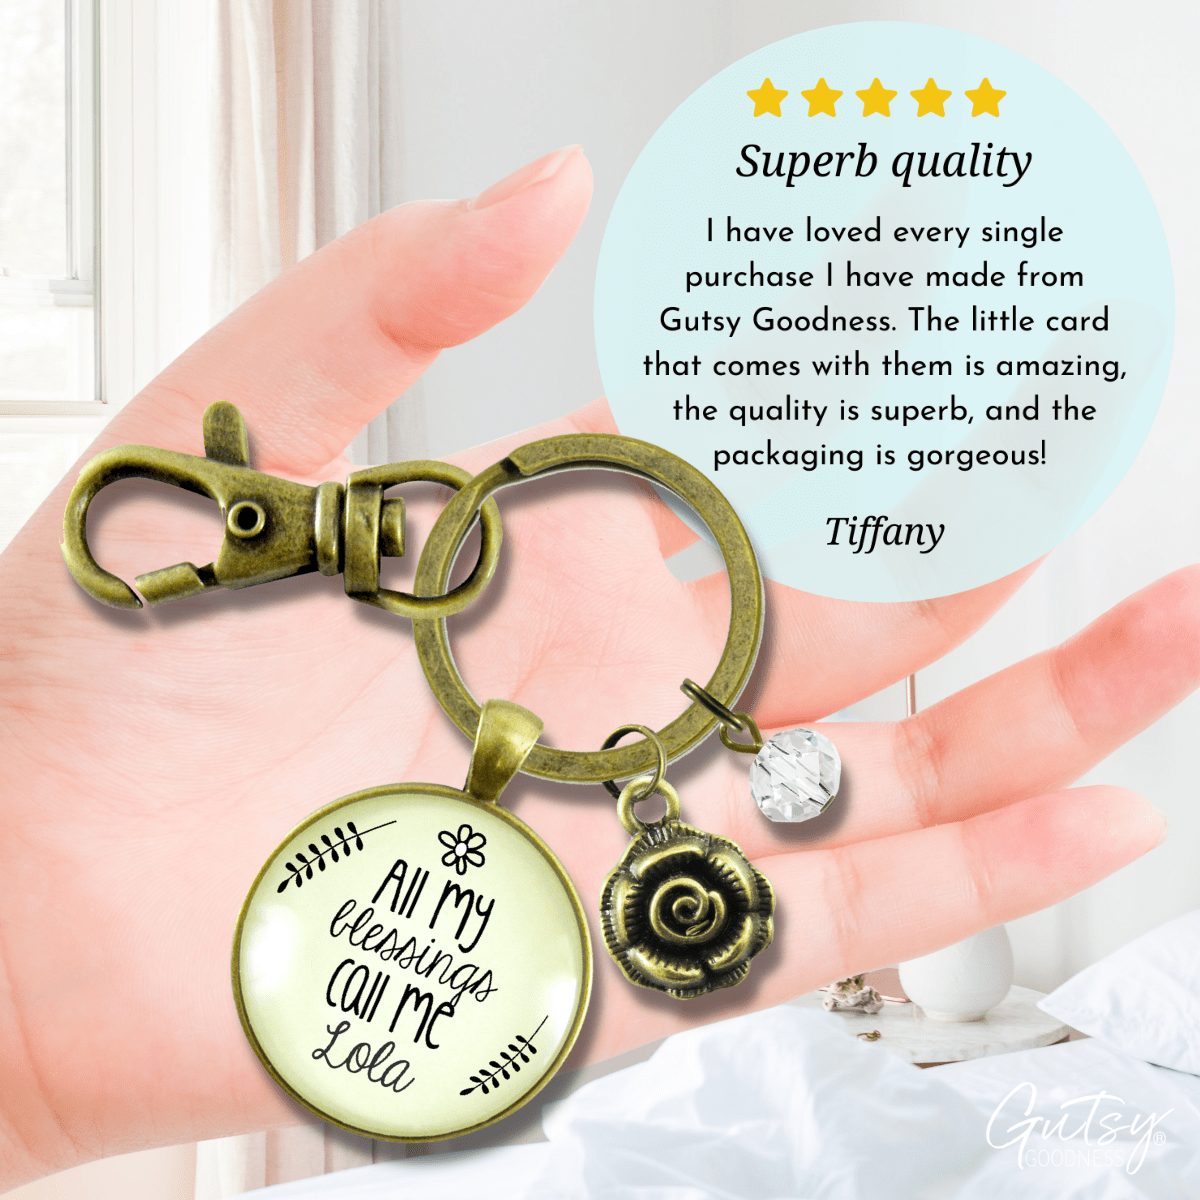 Grandma Lola Keychain All My Blessings Call Me Lola Gift Quote Grandmother Jewelry Gift Flower - Gutsy Goodness Handmade Jewelry;Grandma Lola Keychain All My Blessings Call Me Lola Gift Quote Grandmother Jewelry Gift Flower - Gutsy Goodness Handmade Jewelry Gifts